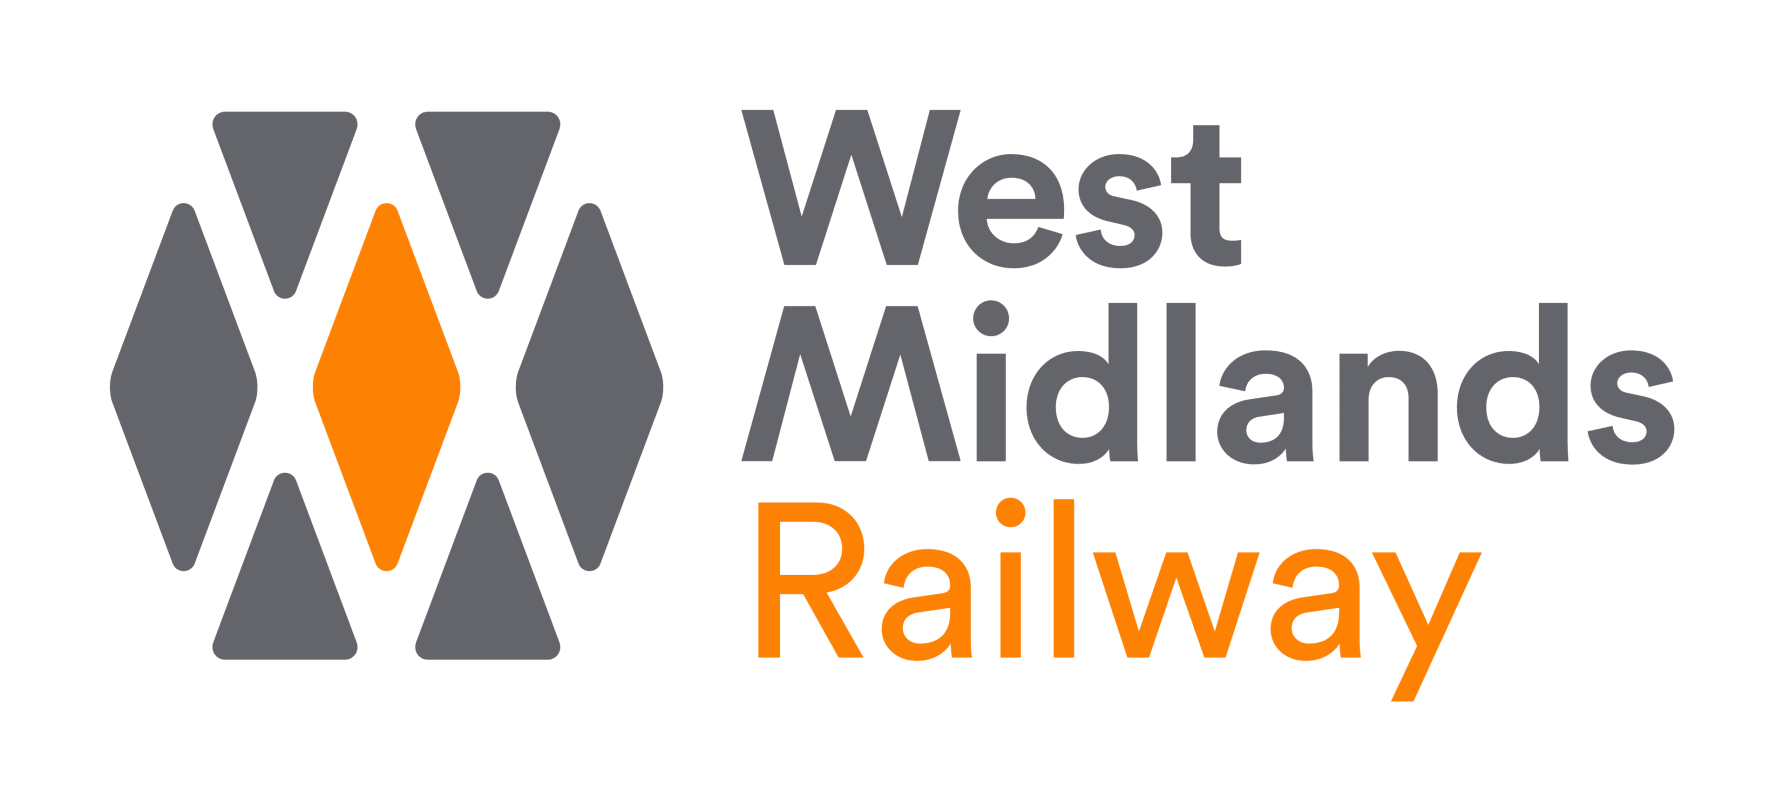 Snow Hill Line passengers offered chance to quiz West Midlands Railway bosses